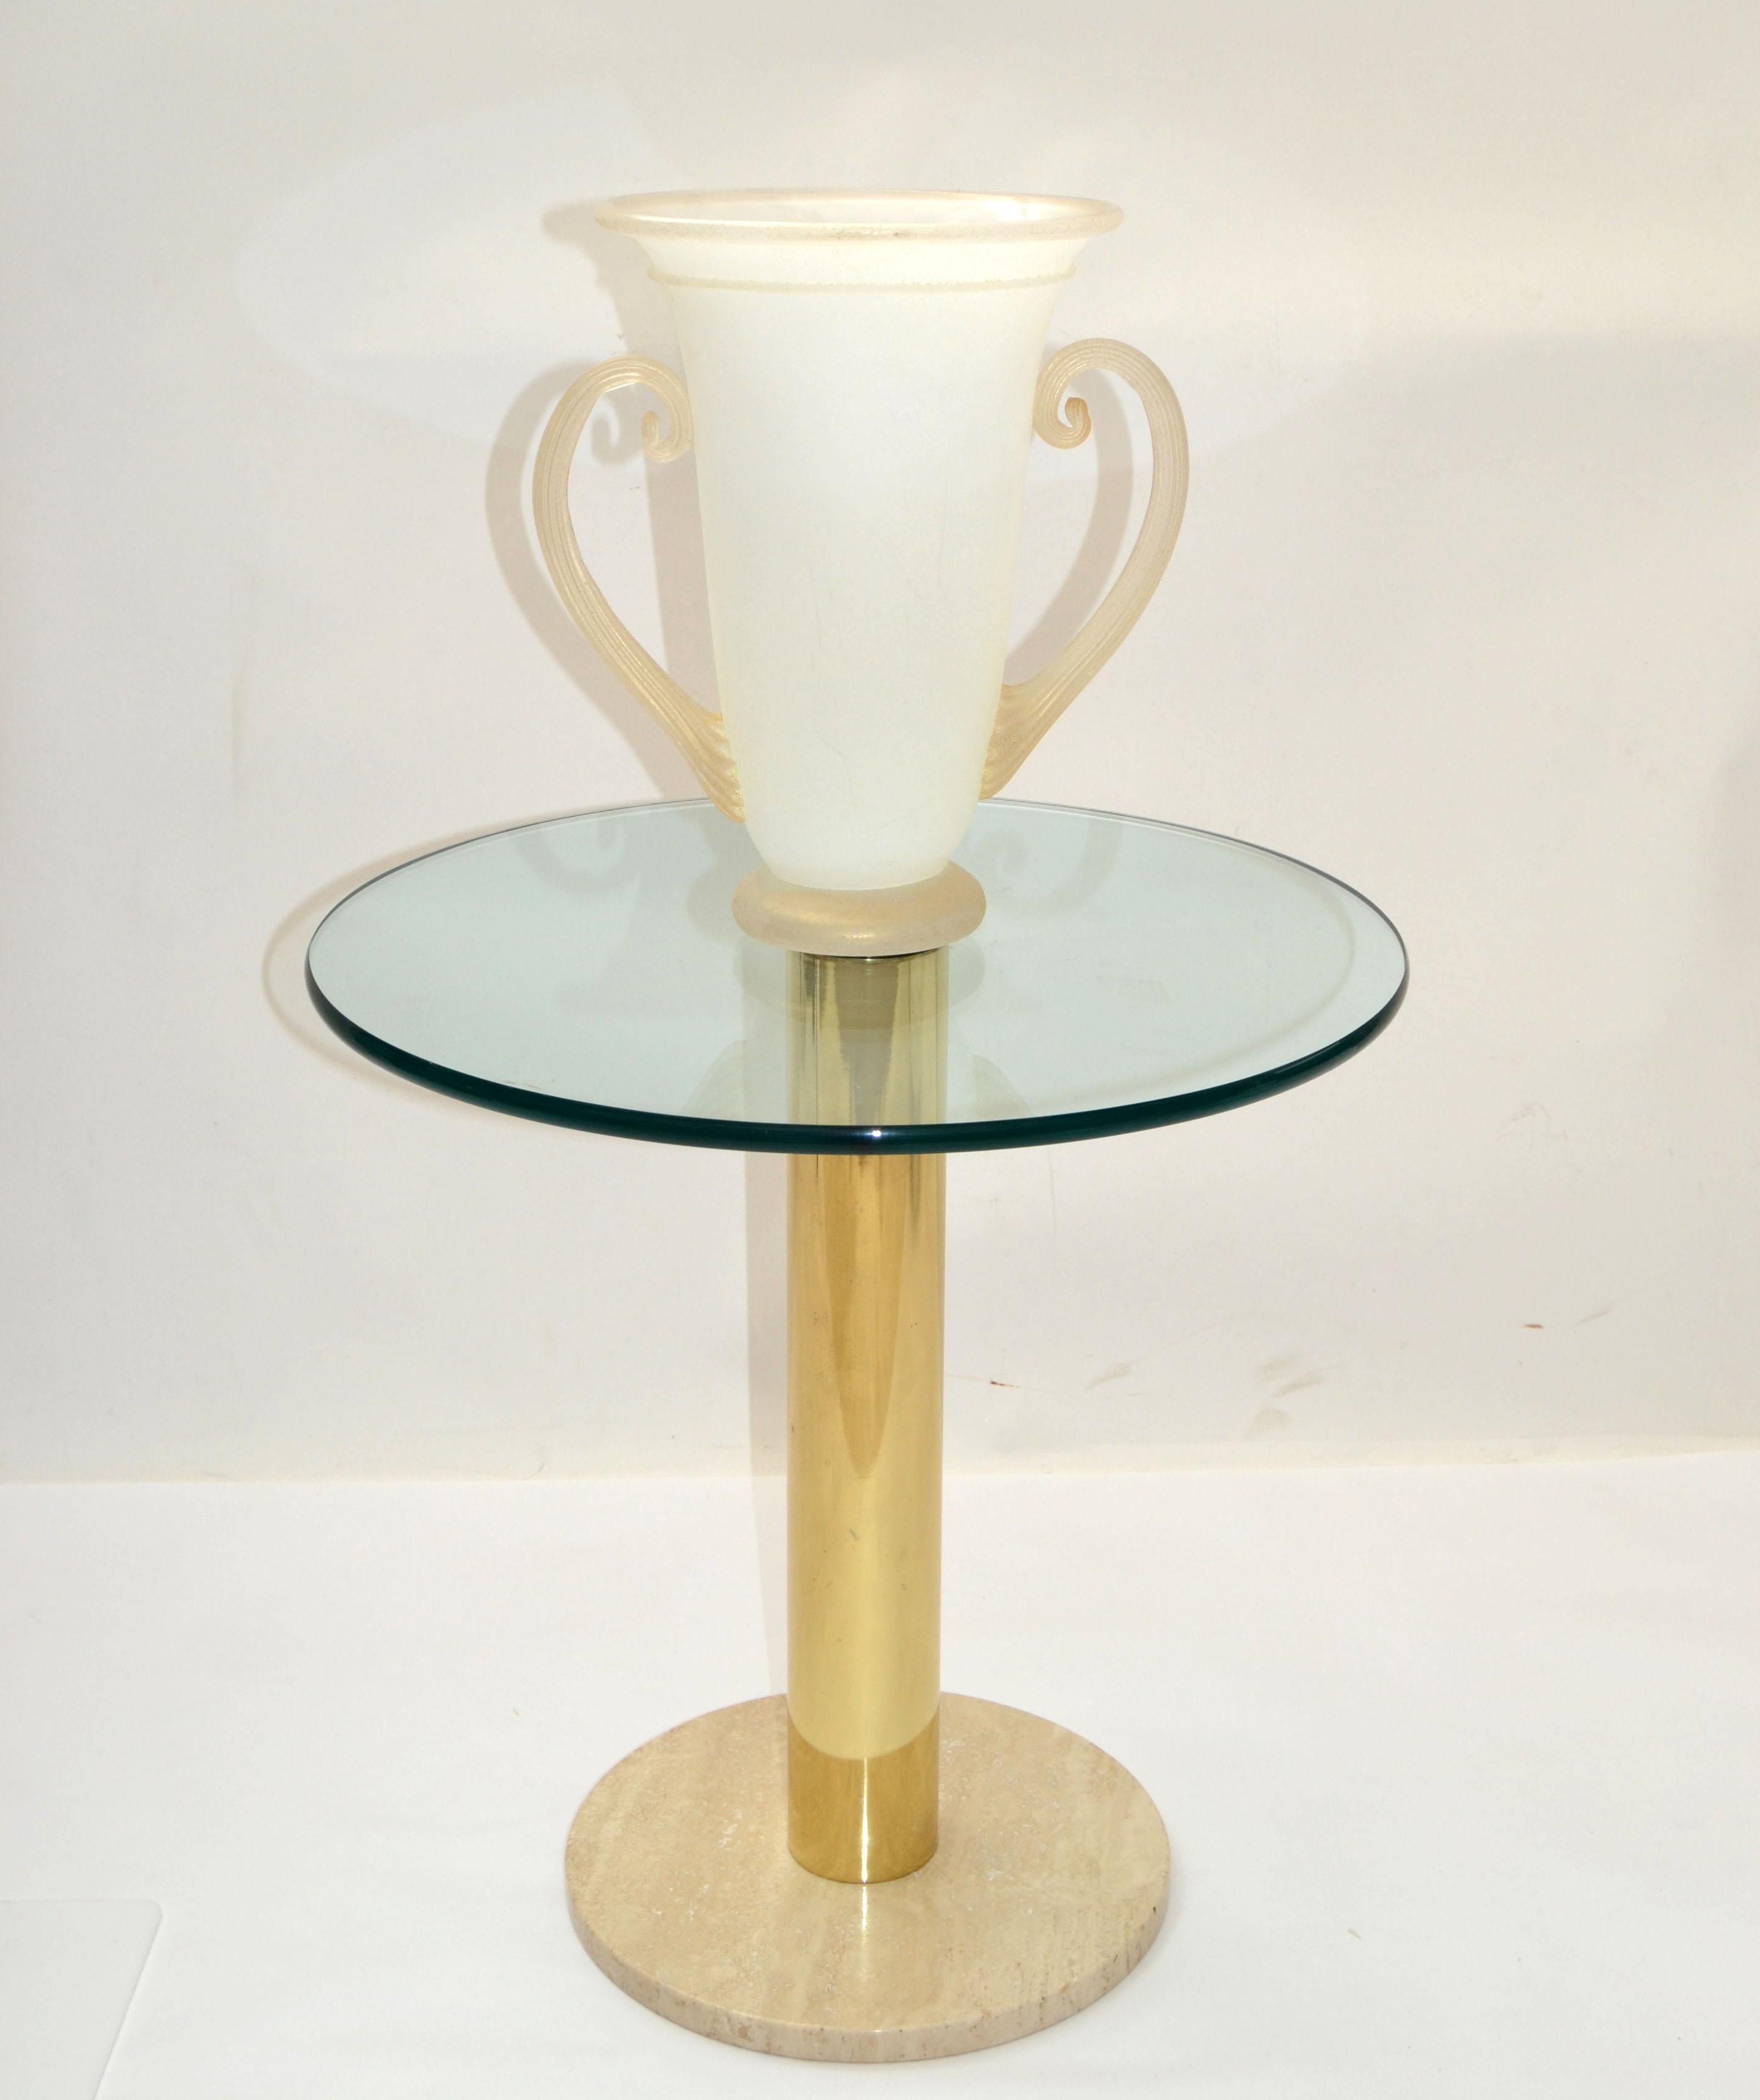 Frosted & infused Gold scavo glass Murano Art glass urn vase, vessel, decanter Mid-Century Modern made in Italy in 1980.
Diameter of the opening is 9 inches.
The decorative Handles are very practical as well as beautifully crafted.